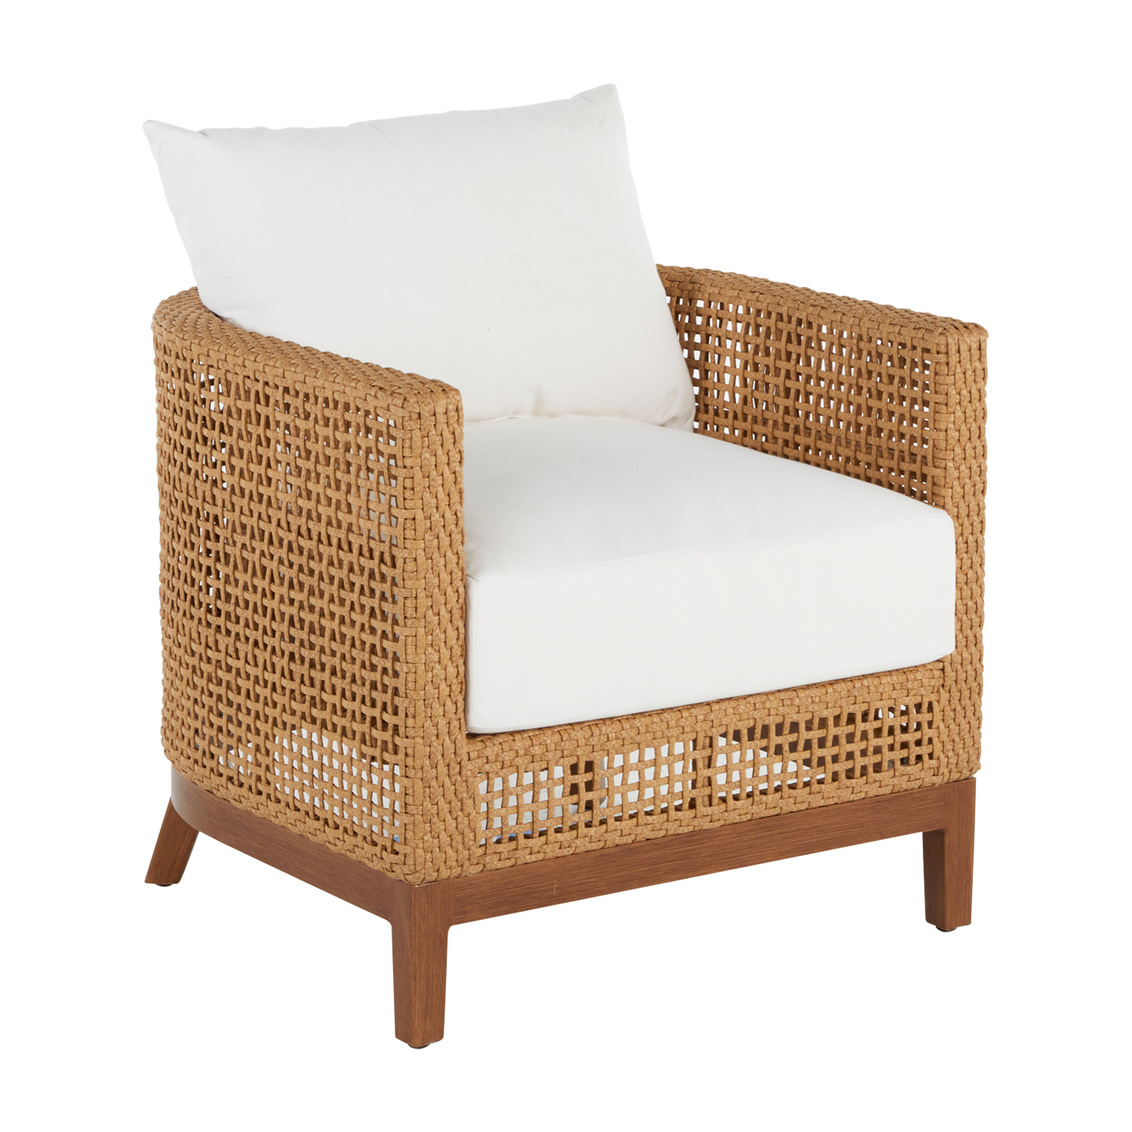 peninsula barrel chair in light raffia/natural sandalwood – frame only product image